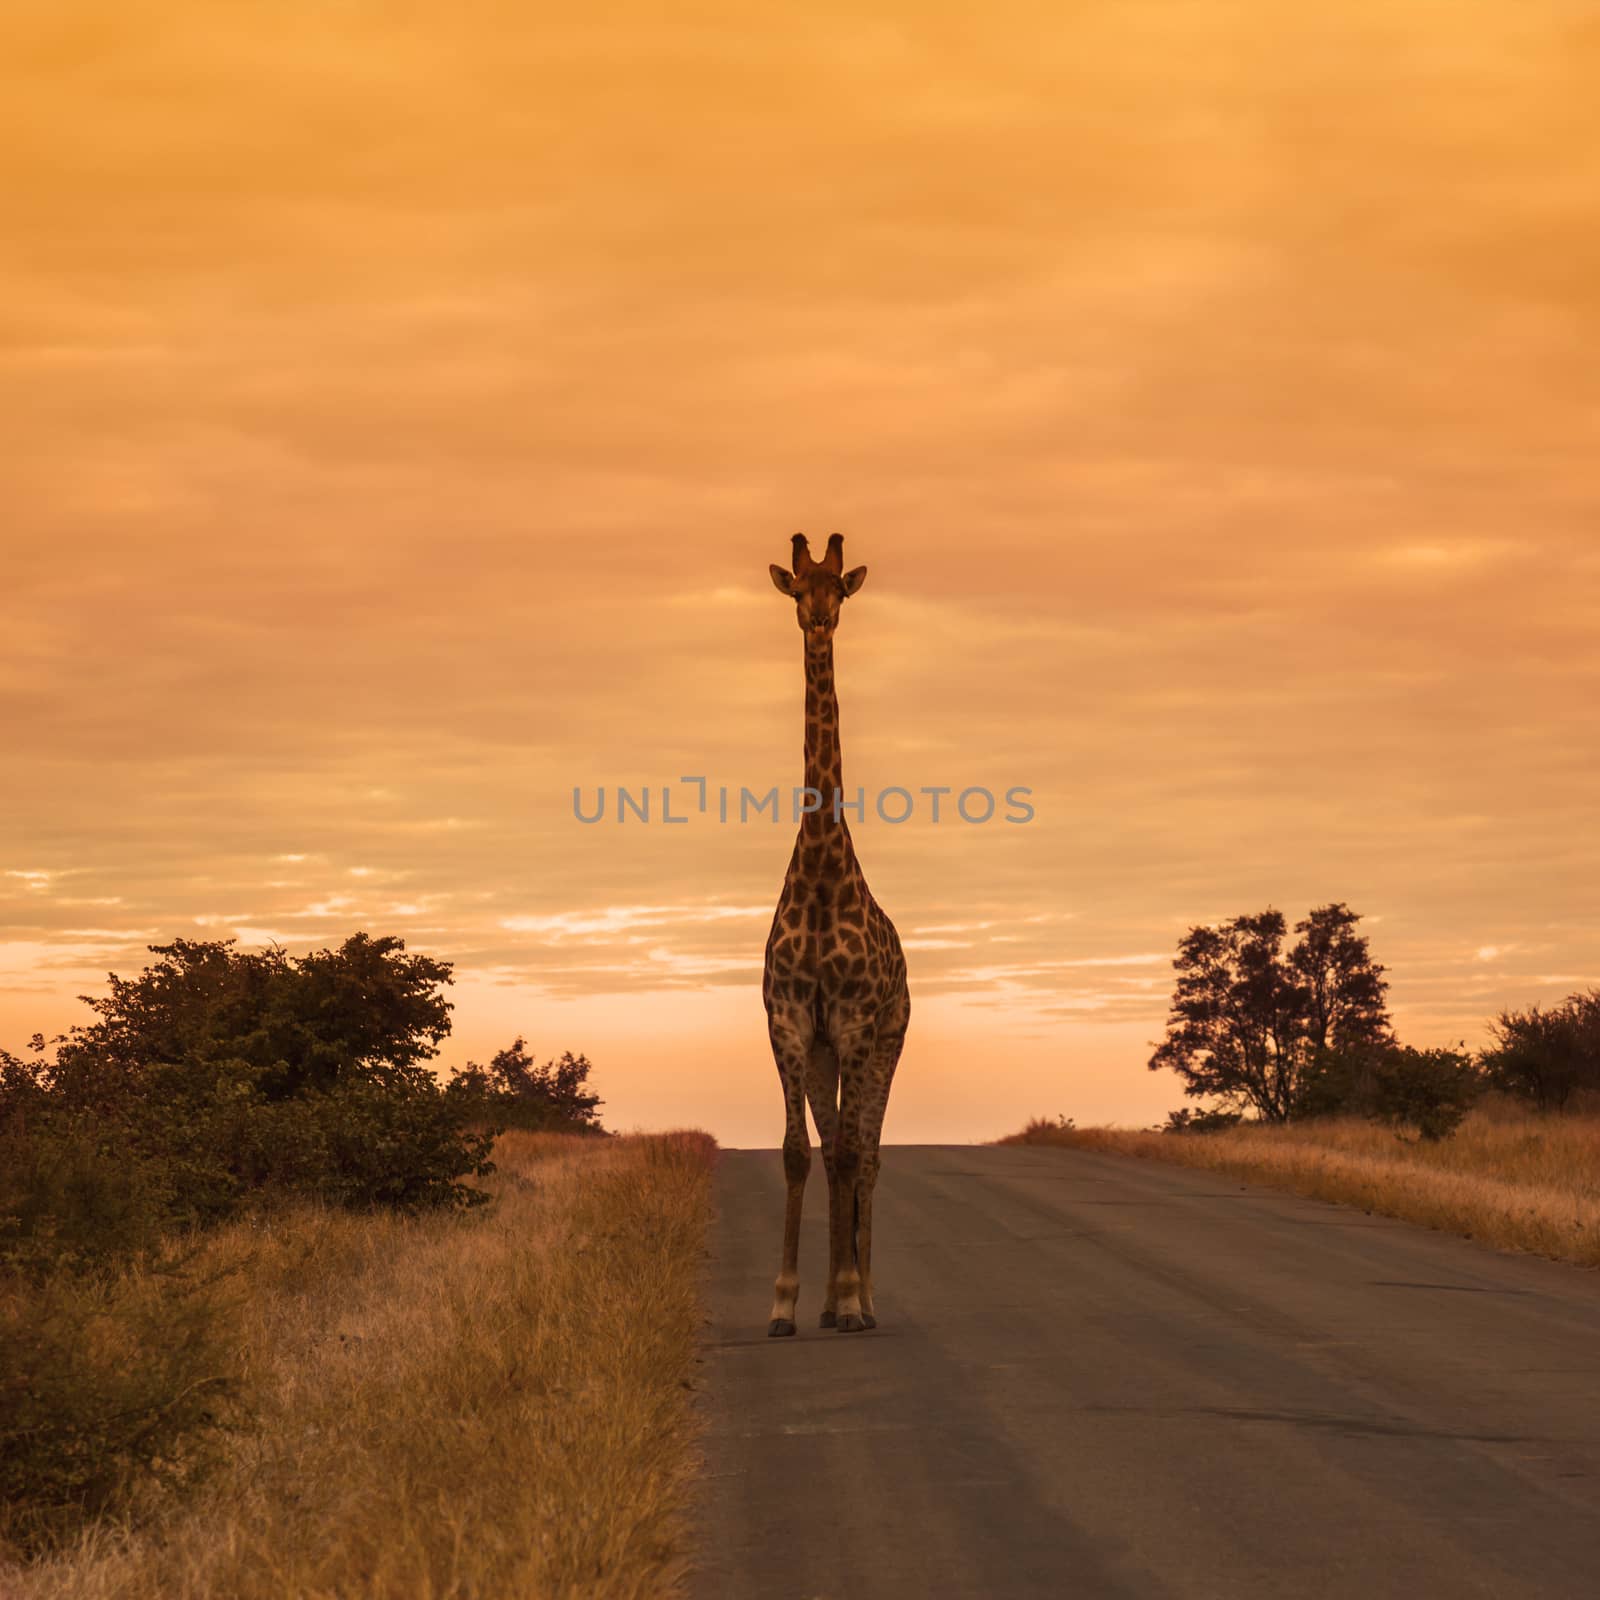 Giraffe standing front view on safari road at sunrise in Kruger National park, South Africa ; Specie Giraffa camelopardalis family of Giraffidae